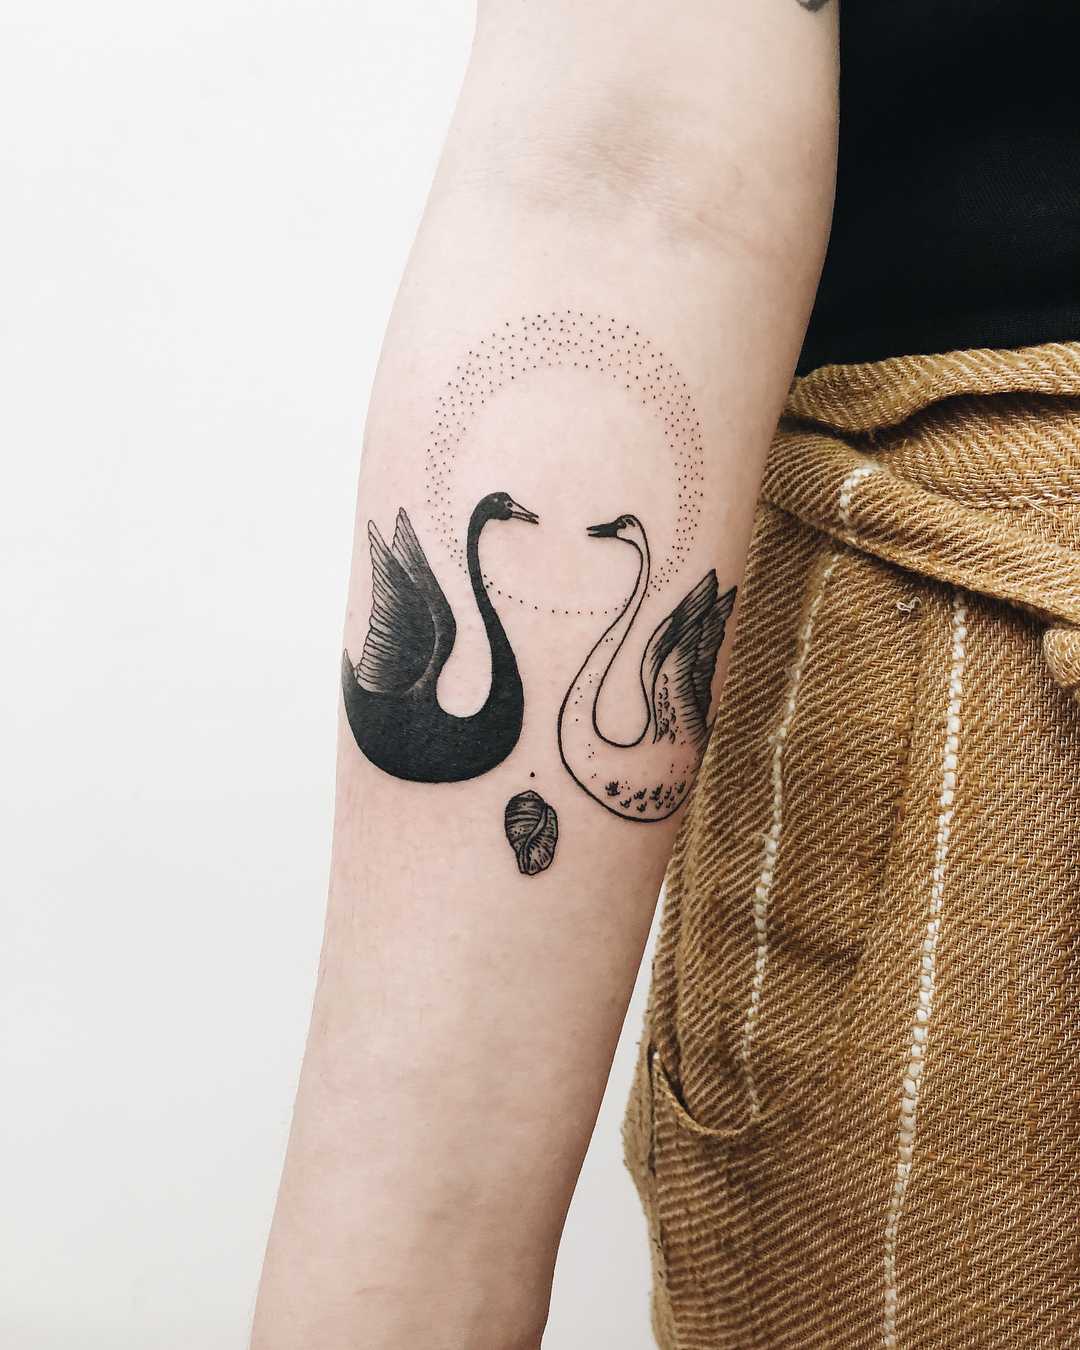 Swan Tattoo Meaning: Personal Stories and Symbolism Behind Body Art